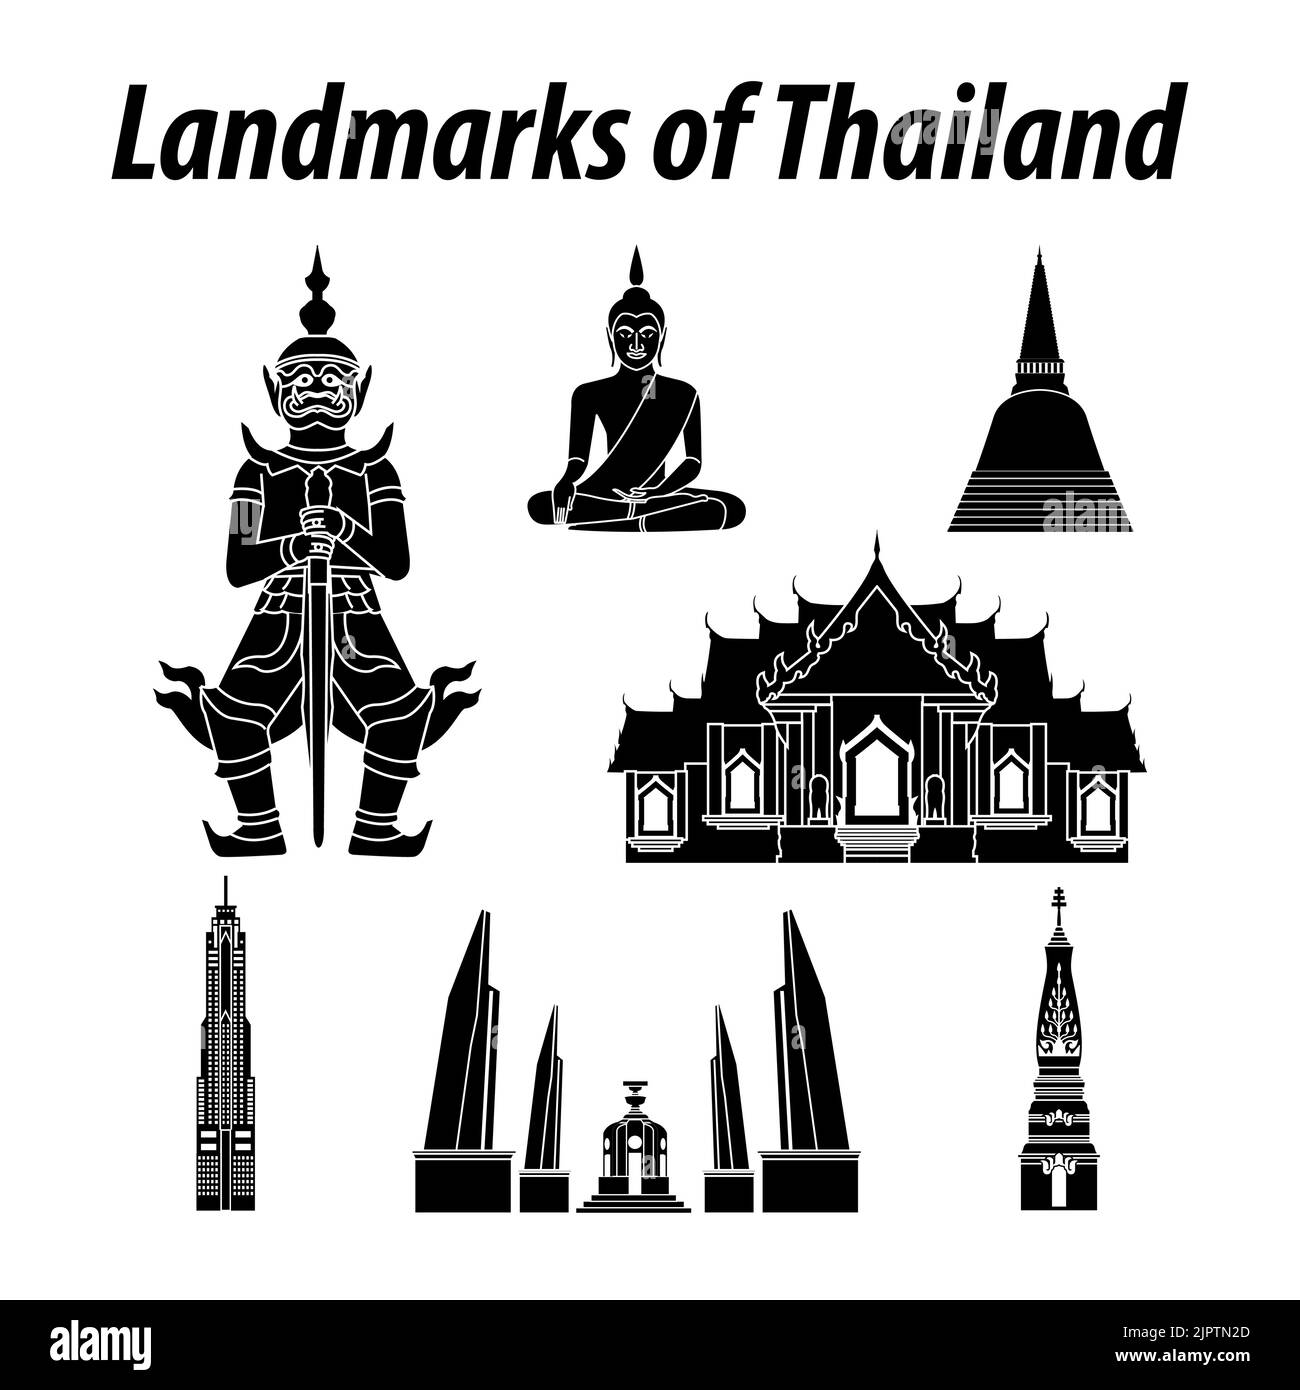 Bundle of Thailand famous landmarks by silhouette style,vector illustration Stock Vector